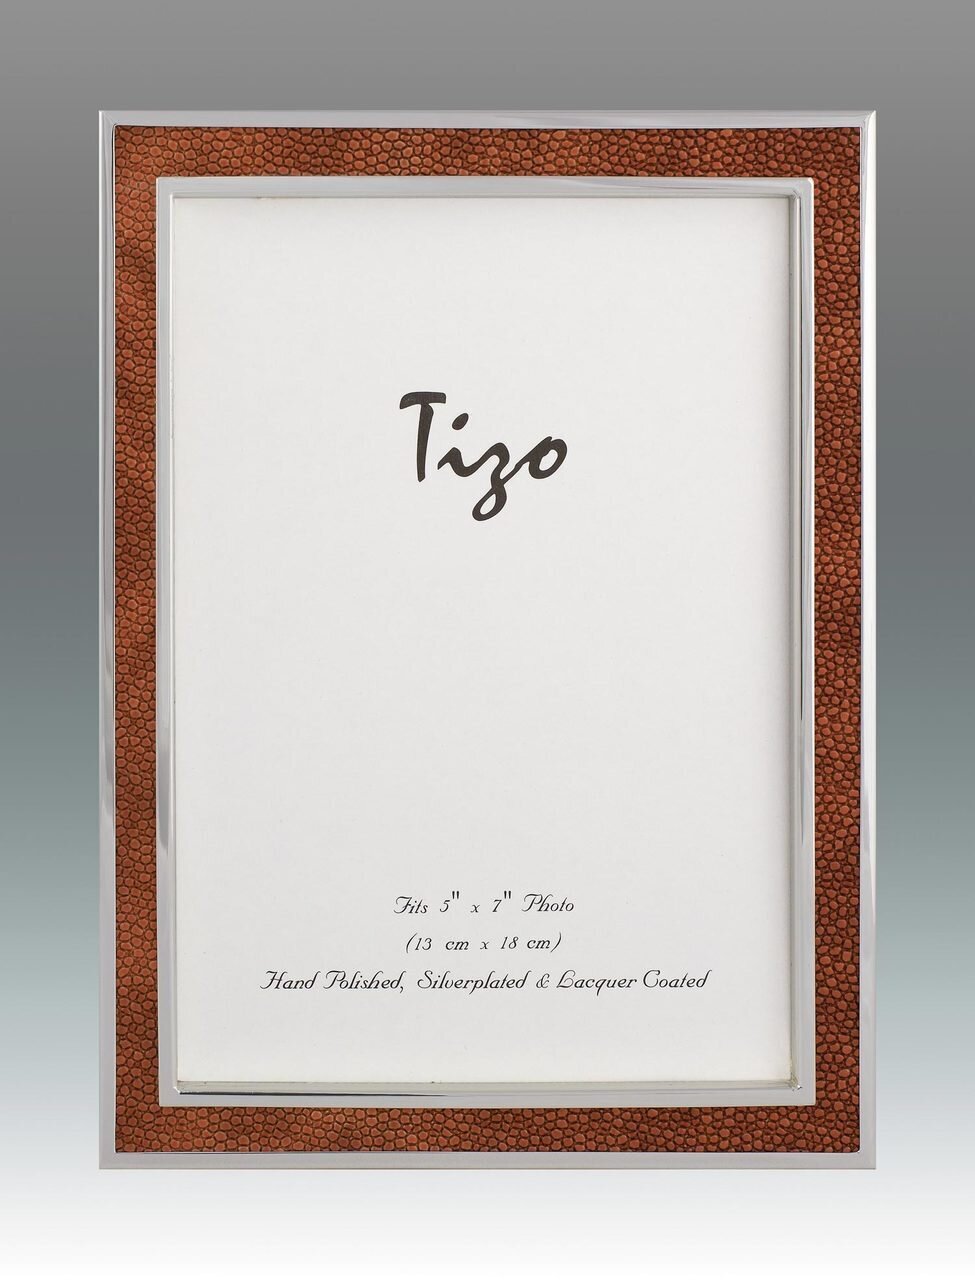 Tizo 4 x 6 Inch Shagreen Silver Plated Picture Frame - Brown